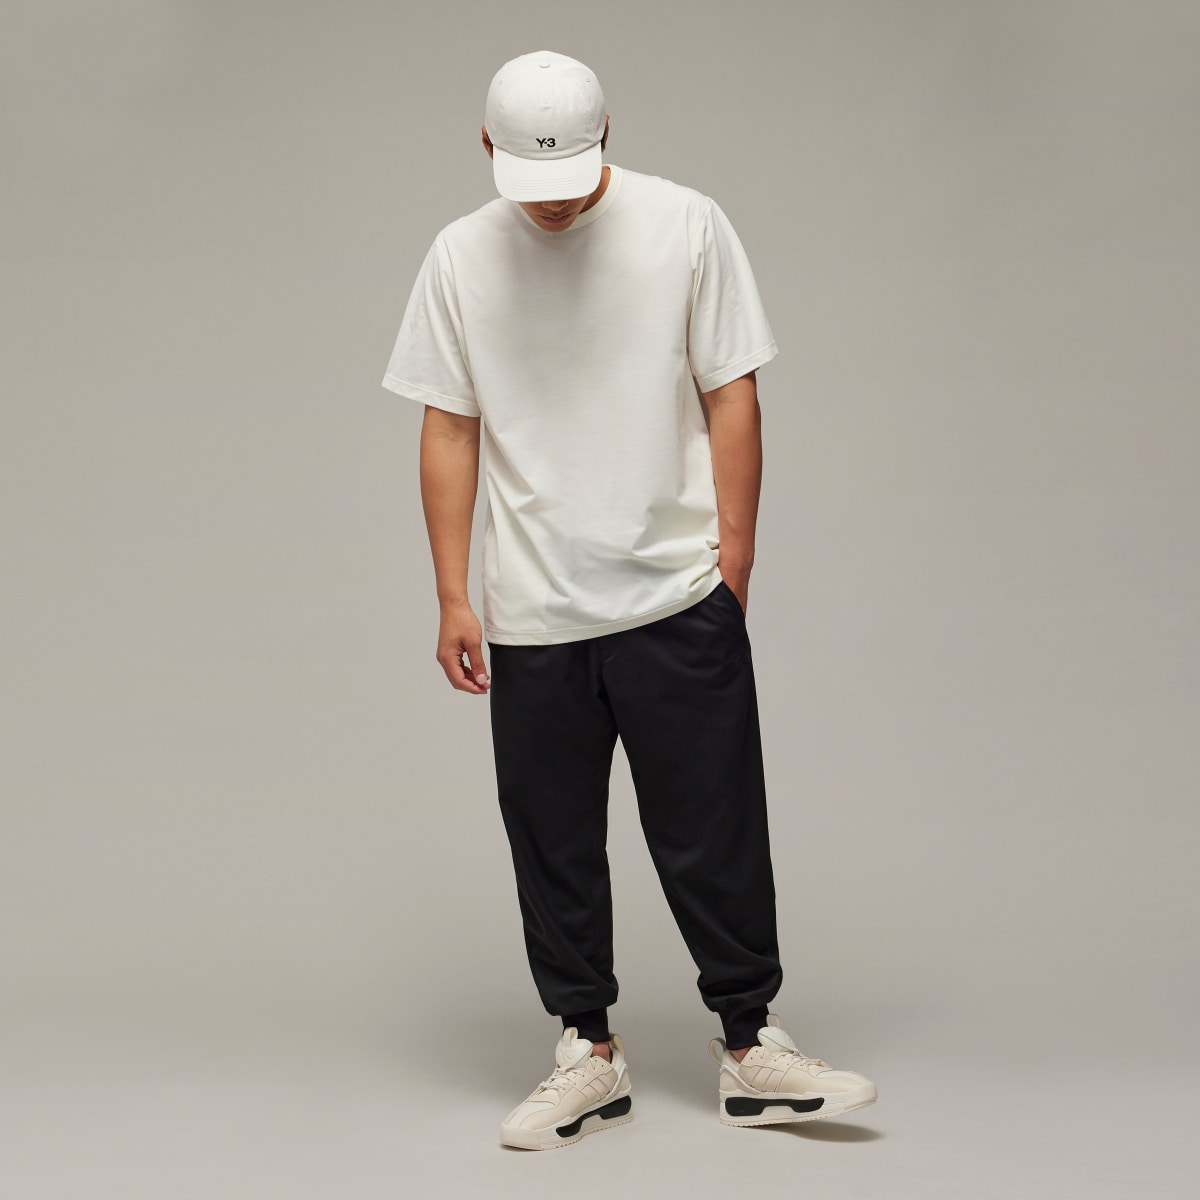 Adidas Y-3 Refined Woven Cuffed Tracksuit Bottoms. 4